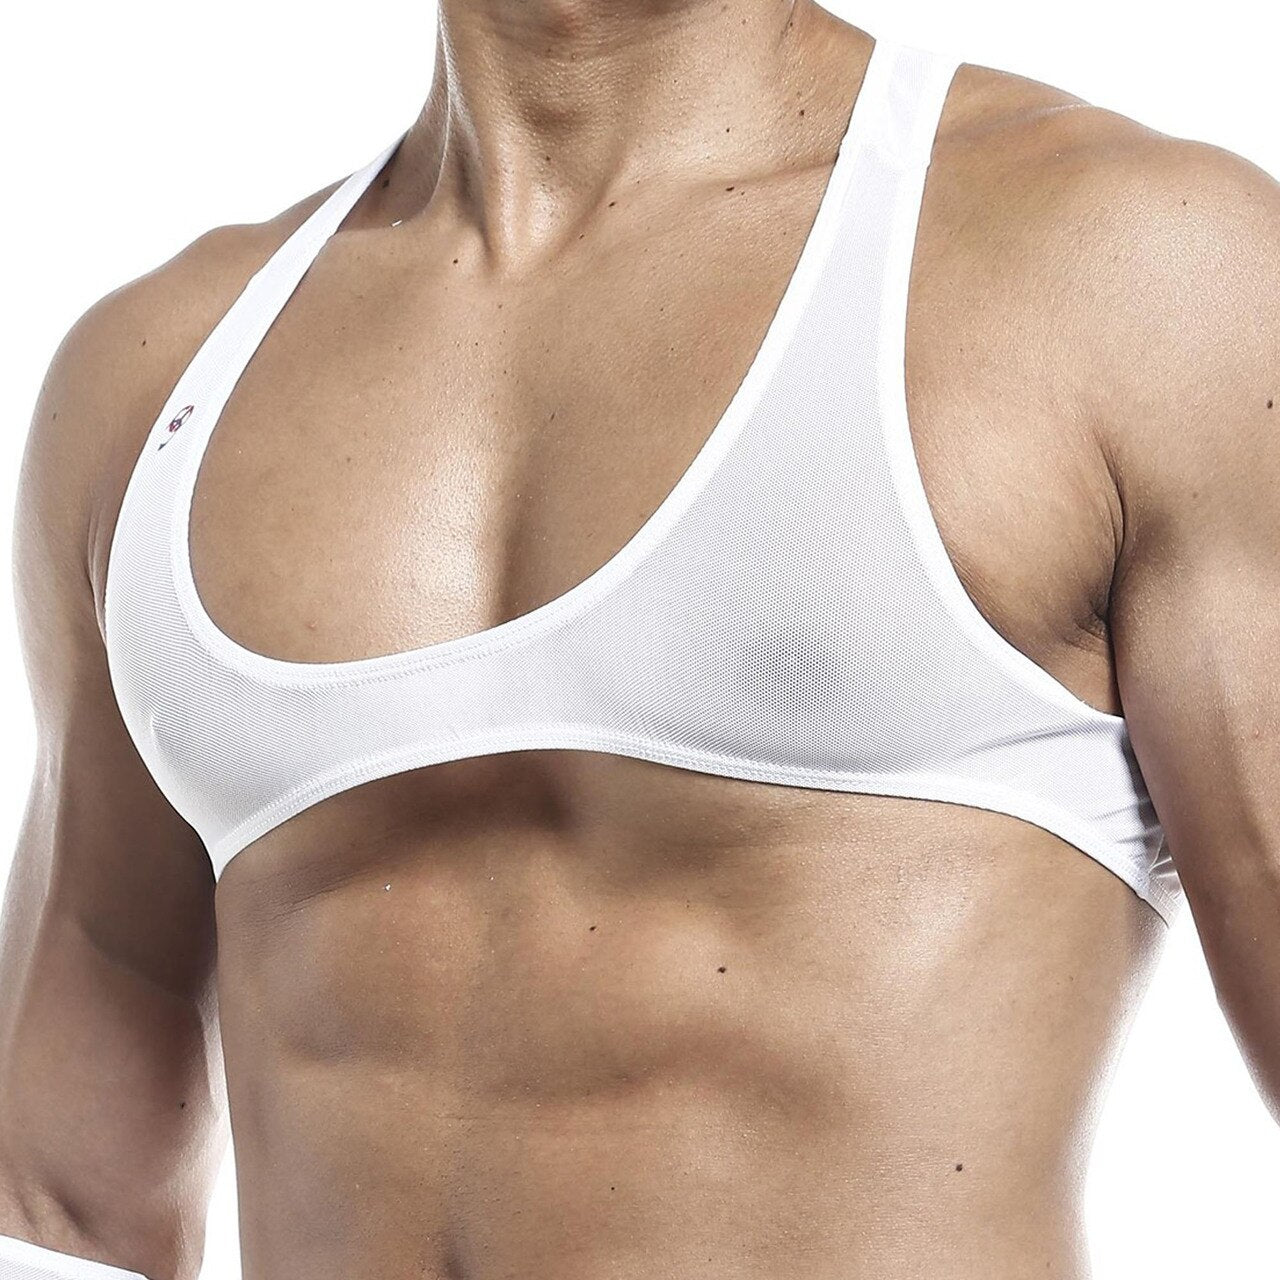 SALE - Mens Joe Snyder Stretch Mesh Posing Top with Y Back White